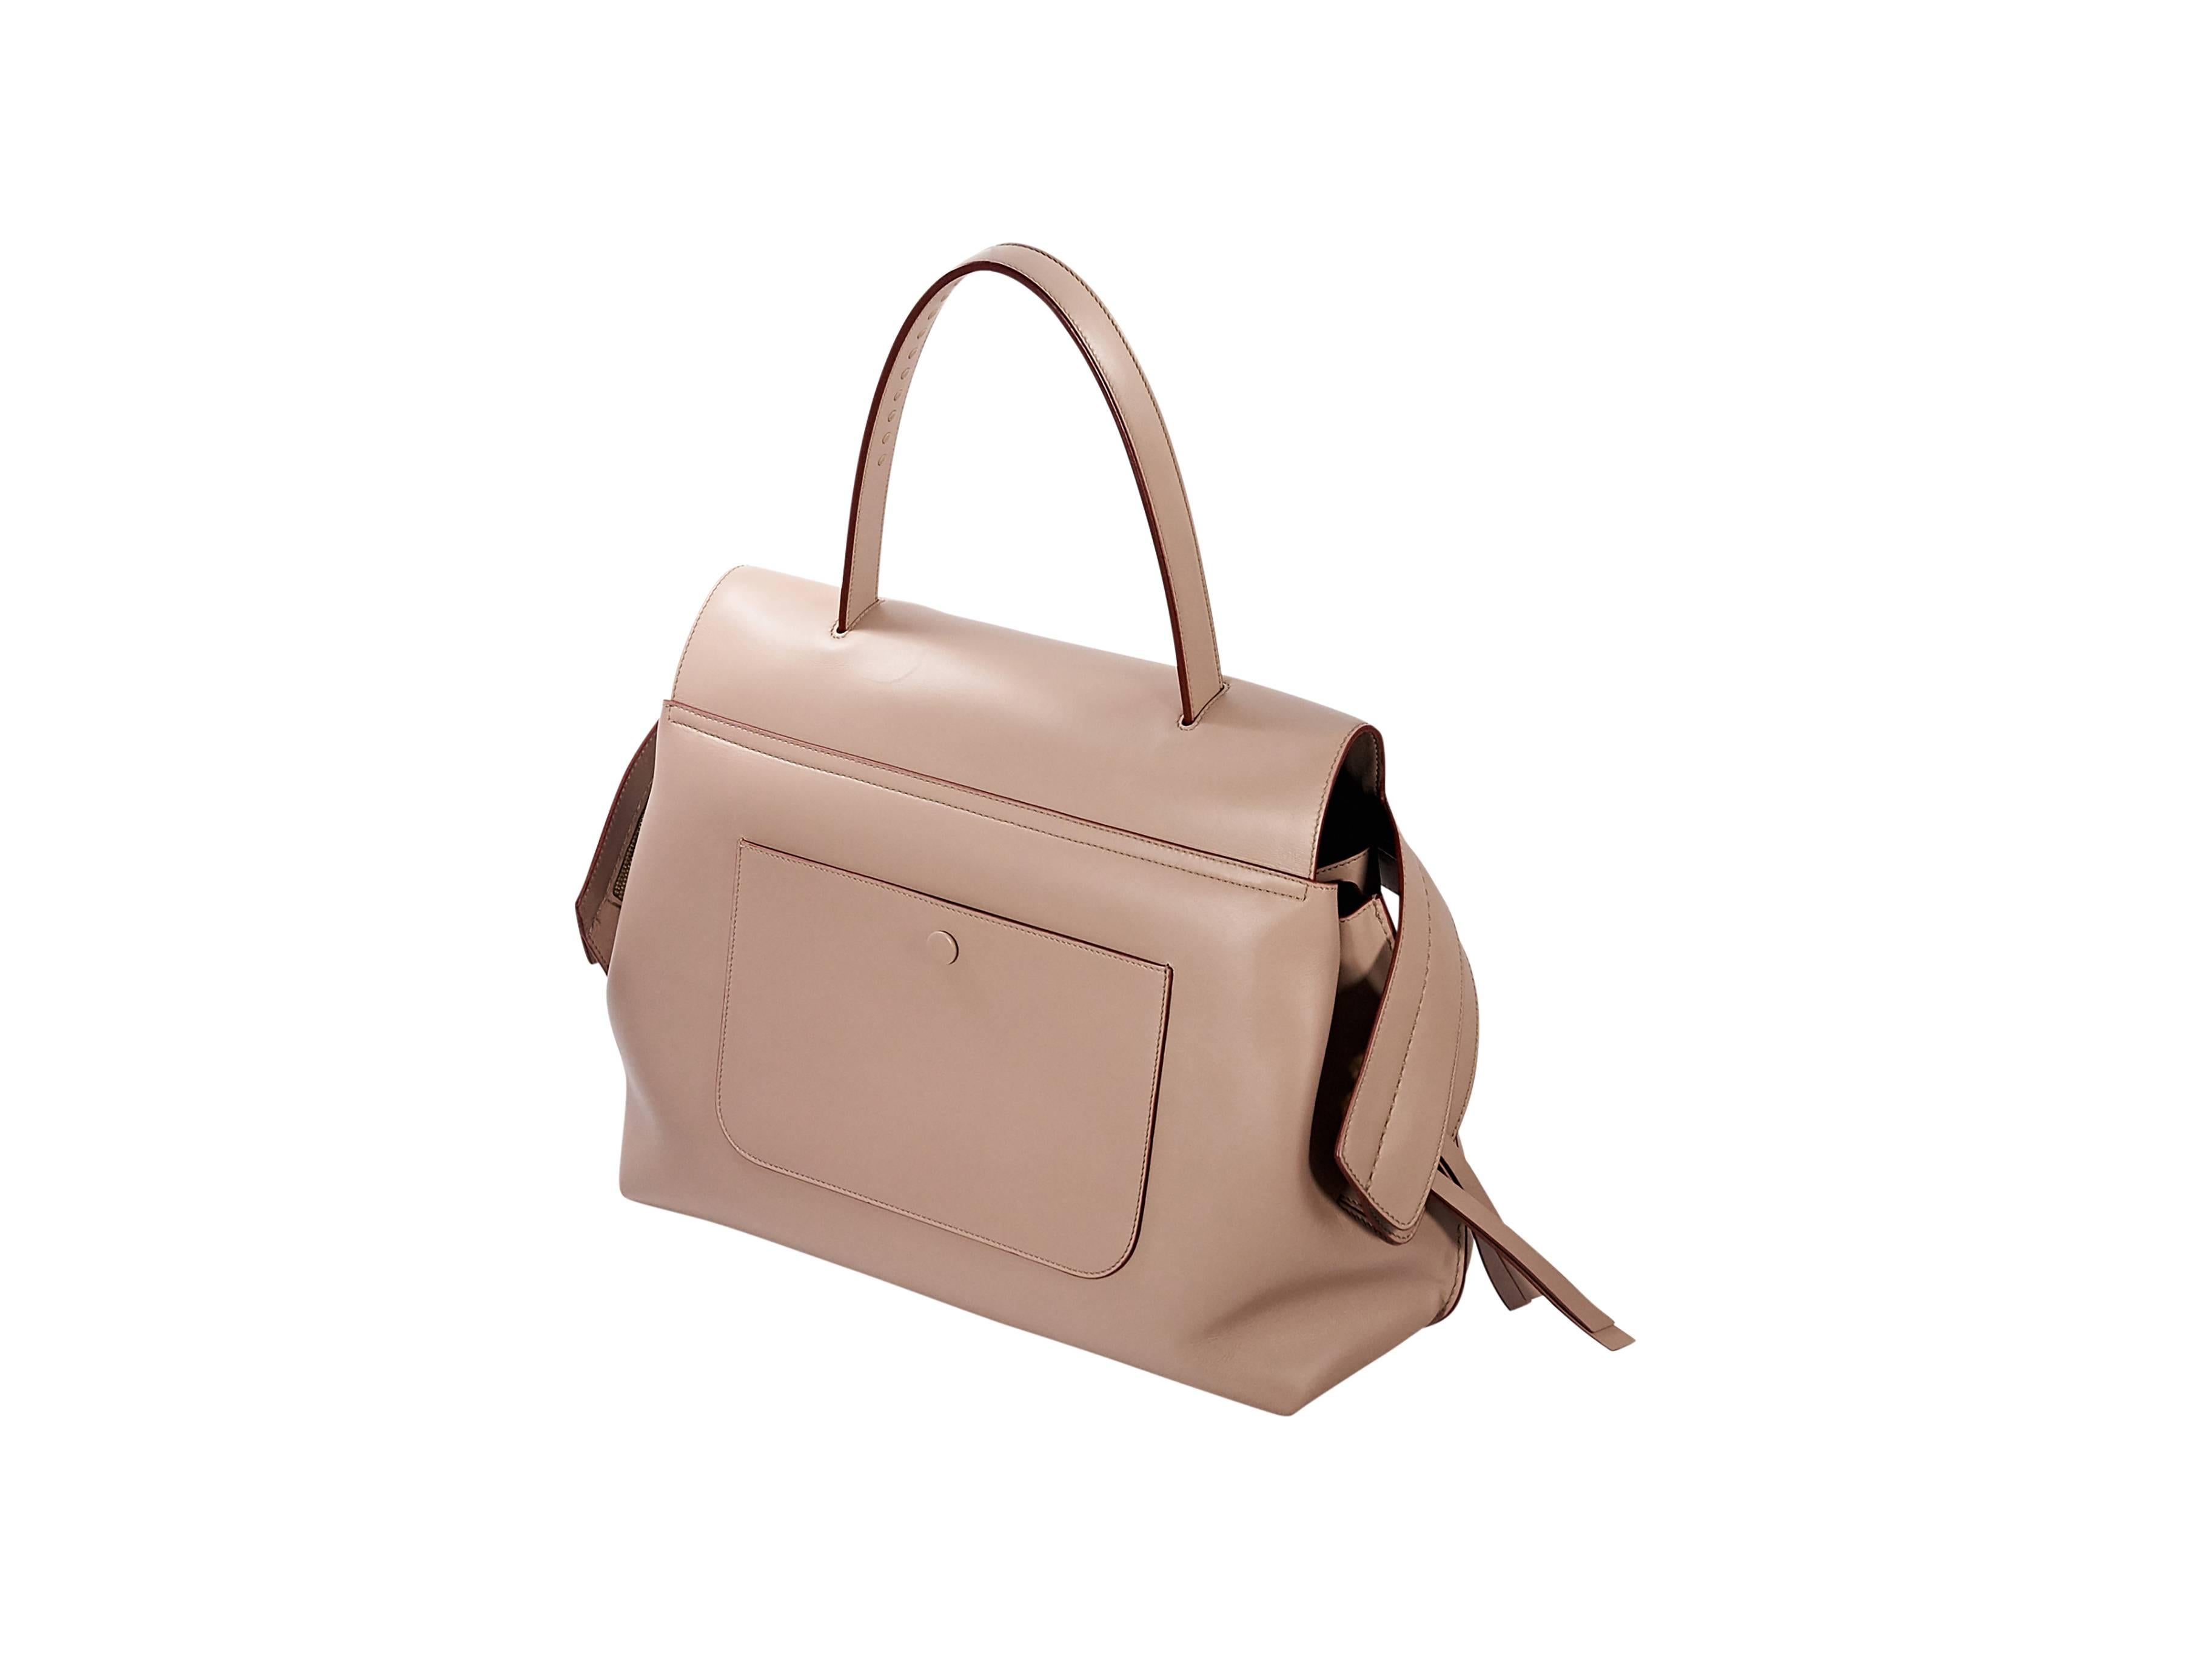 Product details: Pale pink leather Wave top-handle bag by Tod's. Concealed zip closure. Lined interior with inner zip pocket. Back exterior snap patch pocket. 14.5